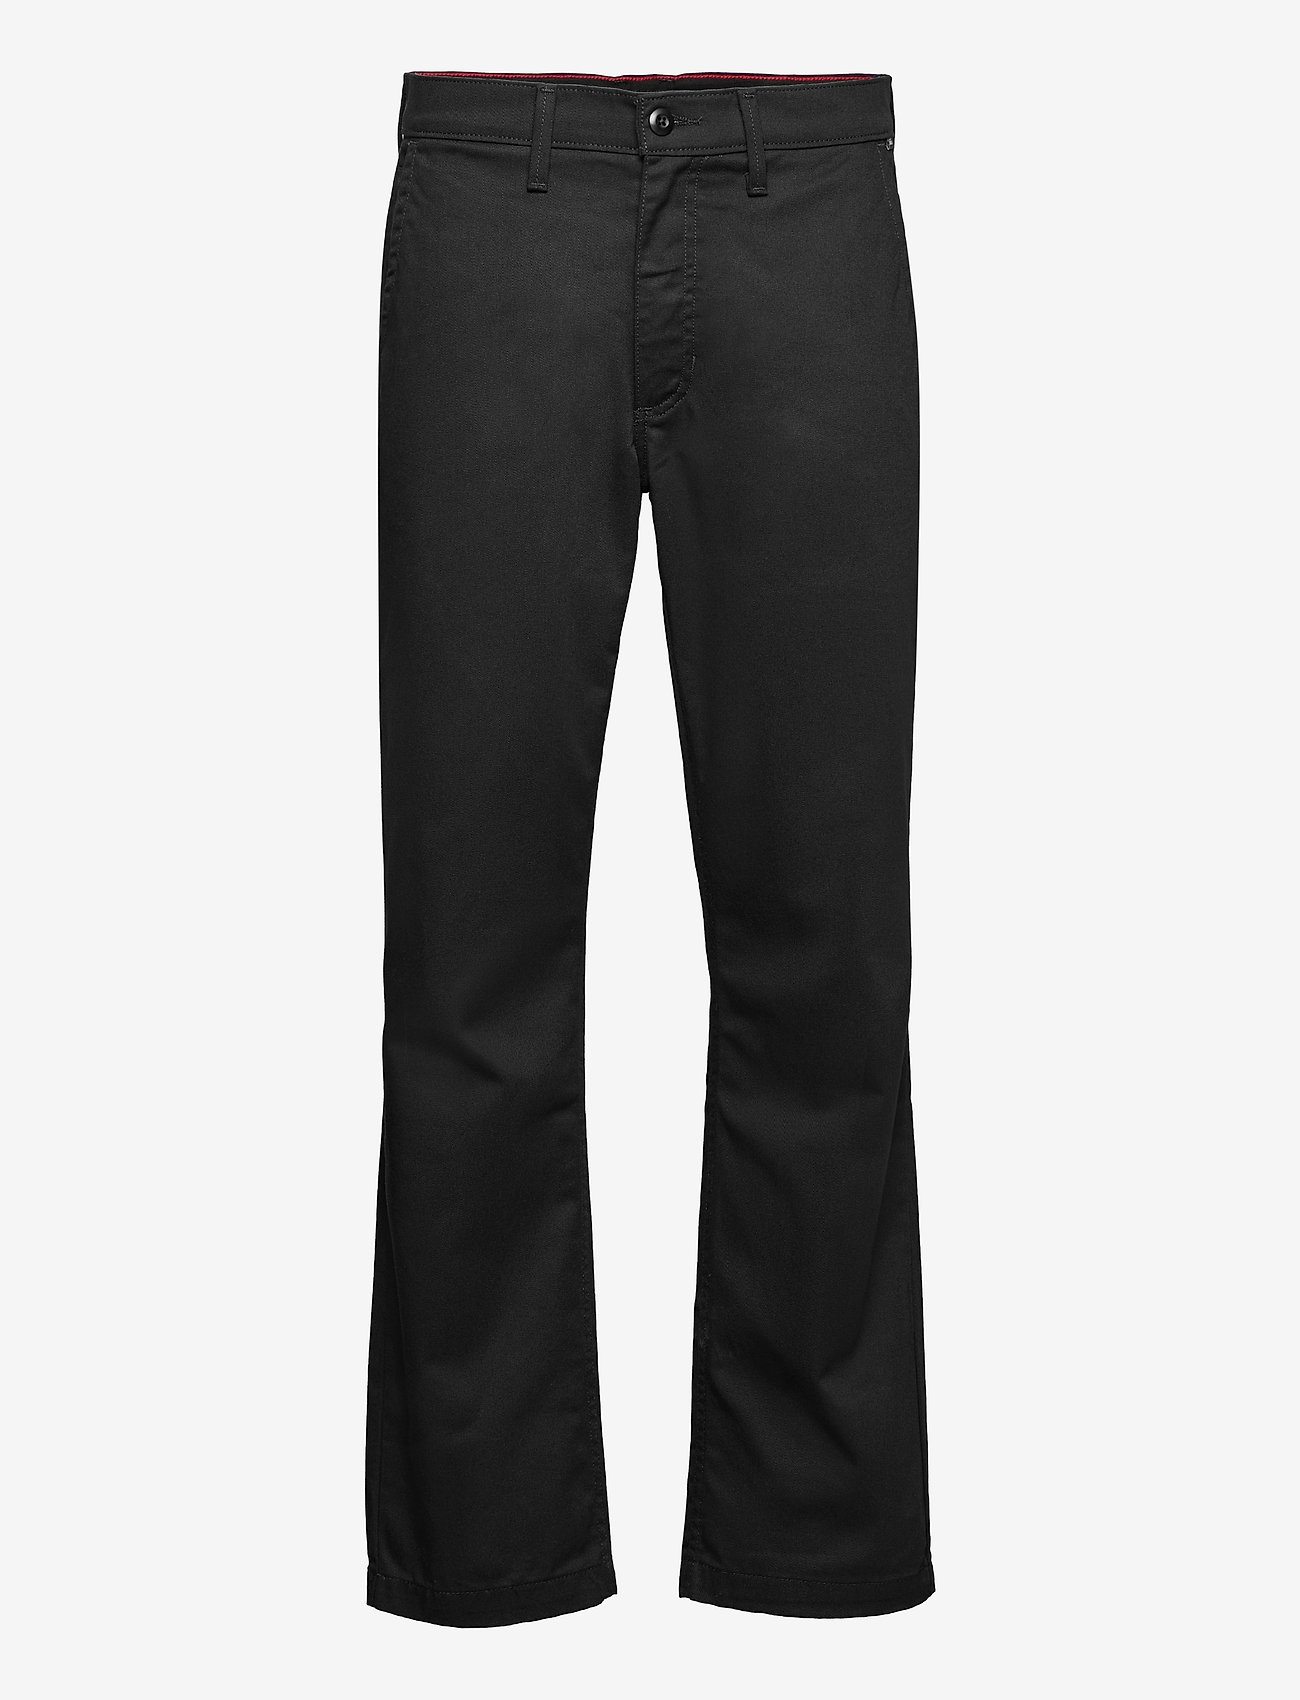 VANS - MN AUTHENTIC CHINO RELAXED PANT - spodnie sportowe - black - 0